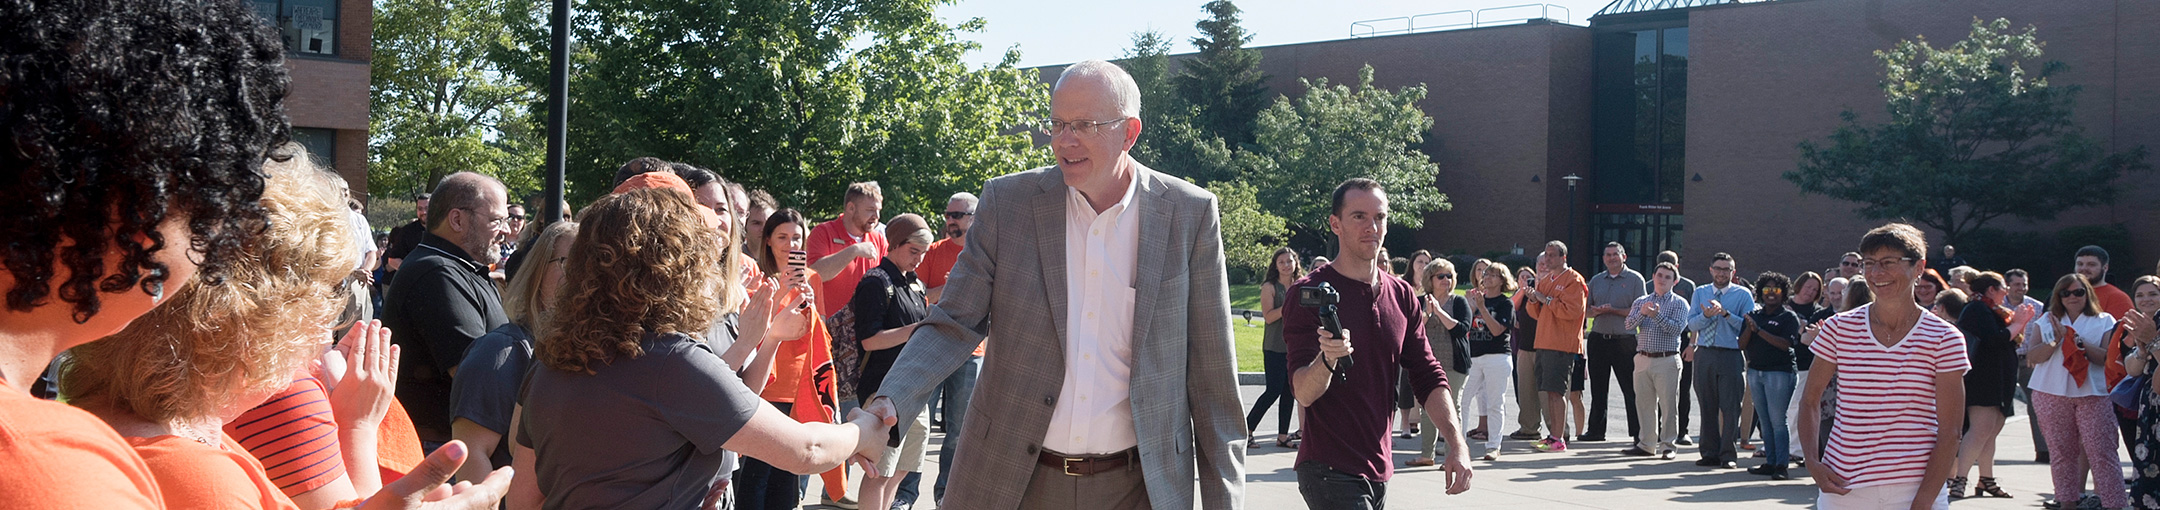 President Munson being greeted by faculty and staff